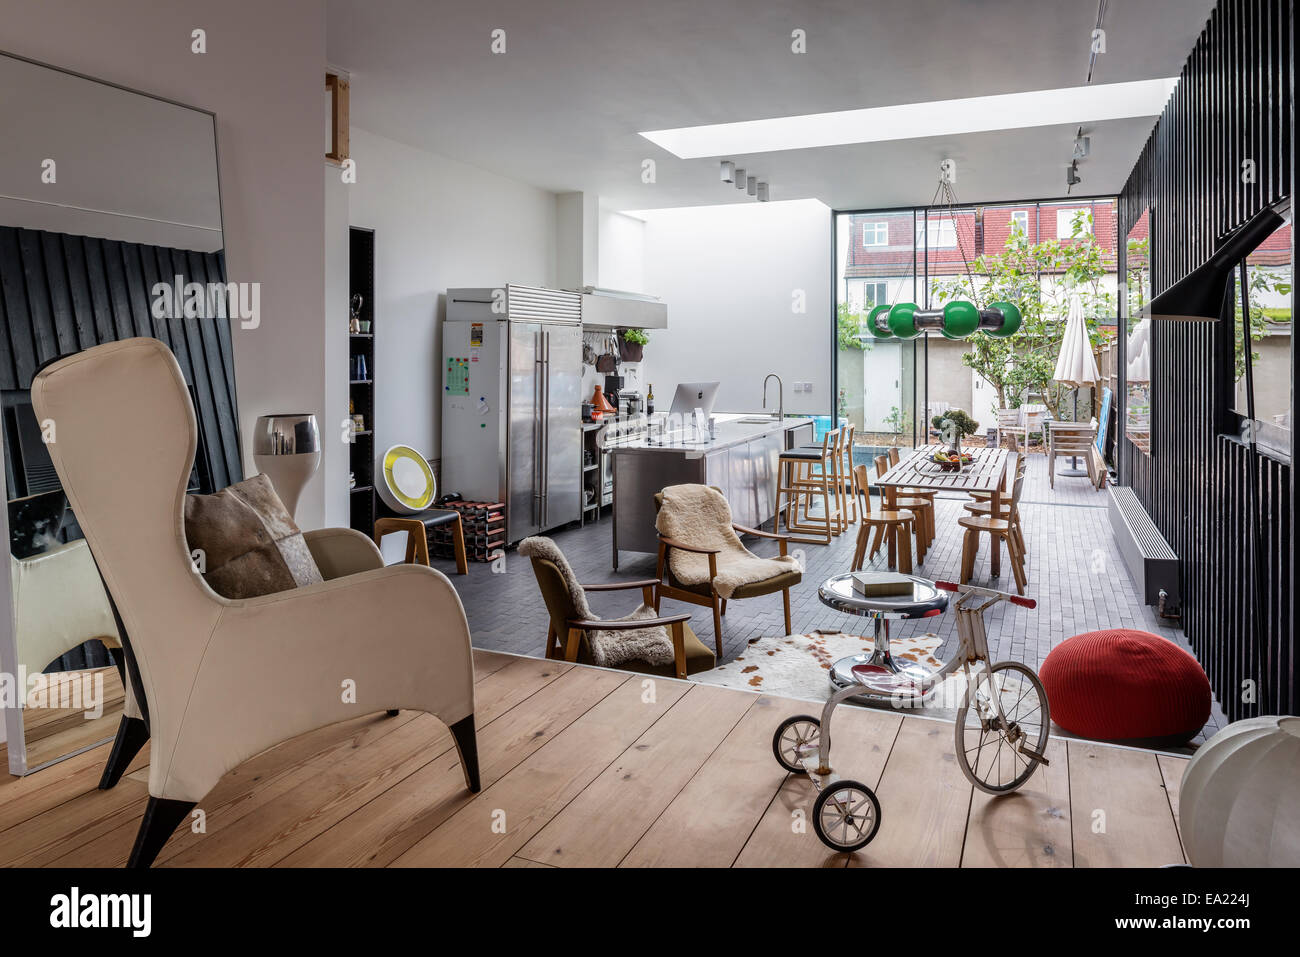 Modern open plan kitchen living space with wingback chair and tricycle in foreground. Stock Photo